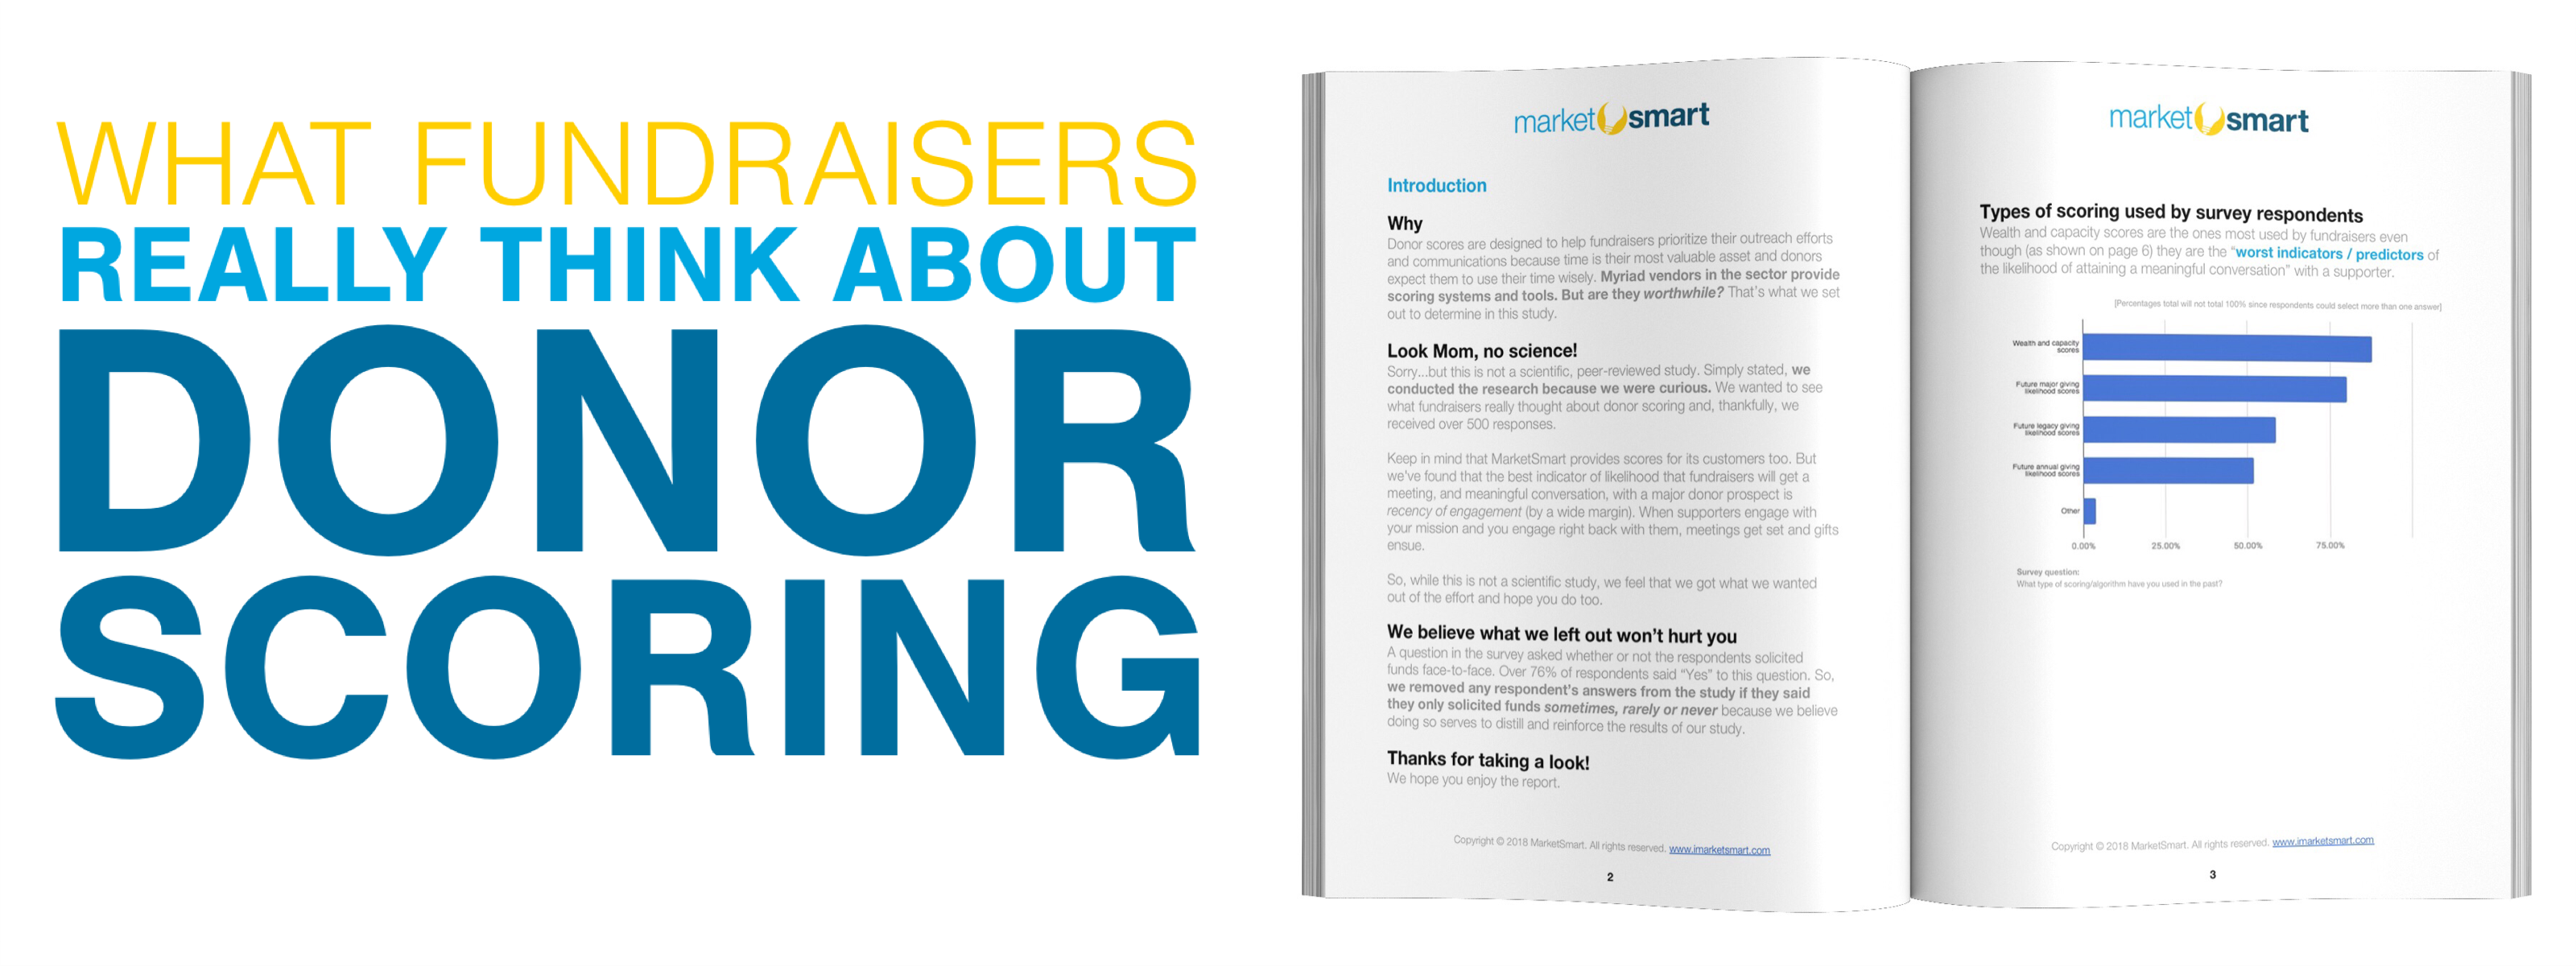 what fundraisers really think about donor scoring report